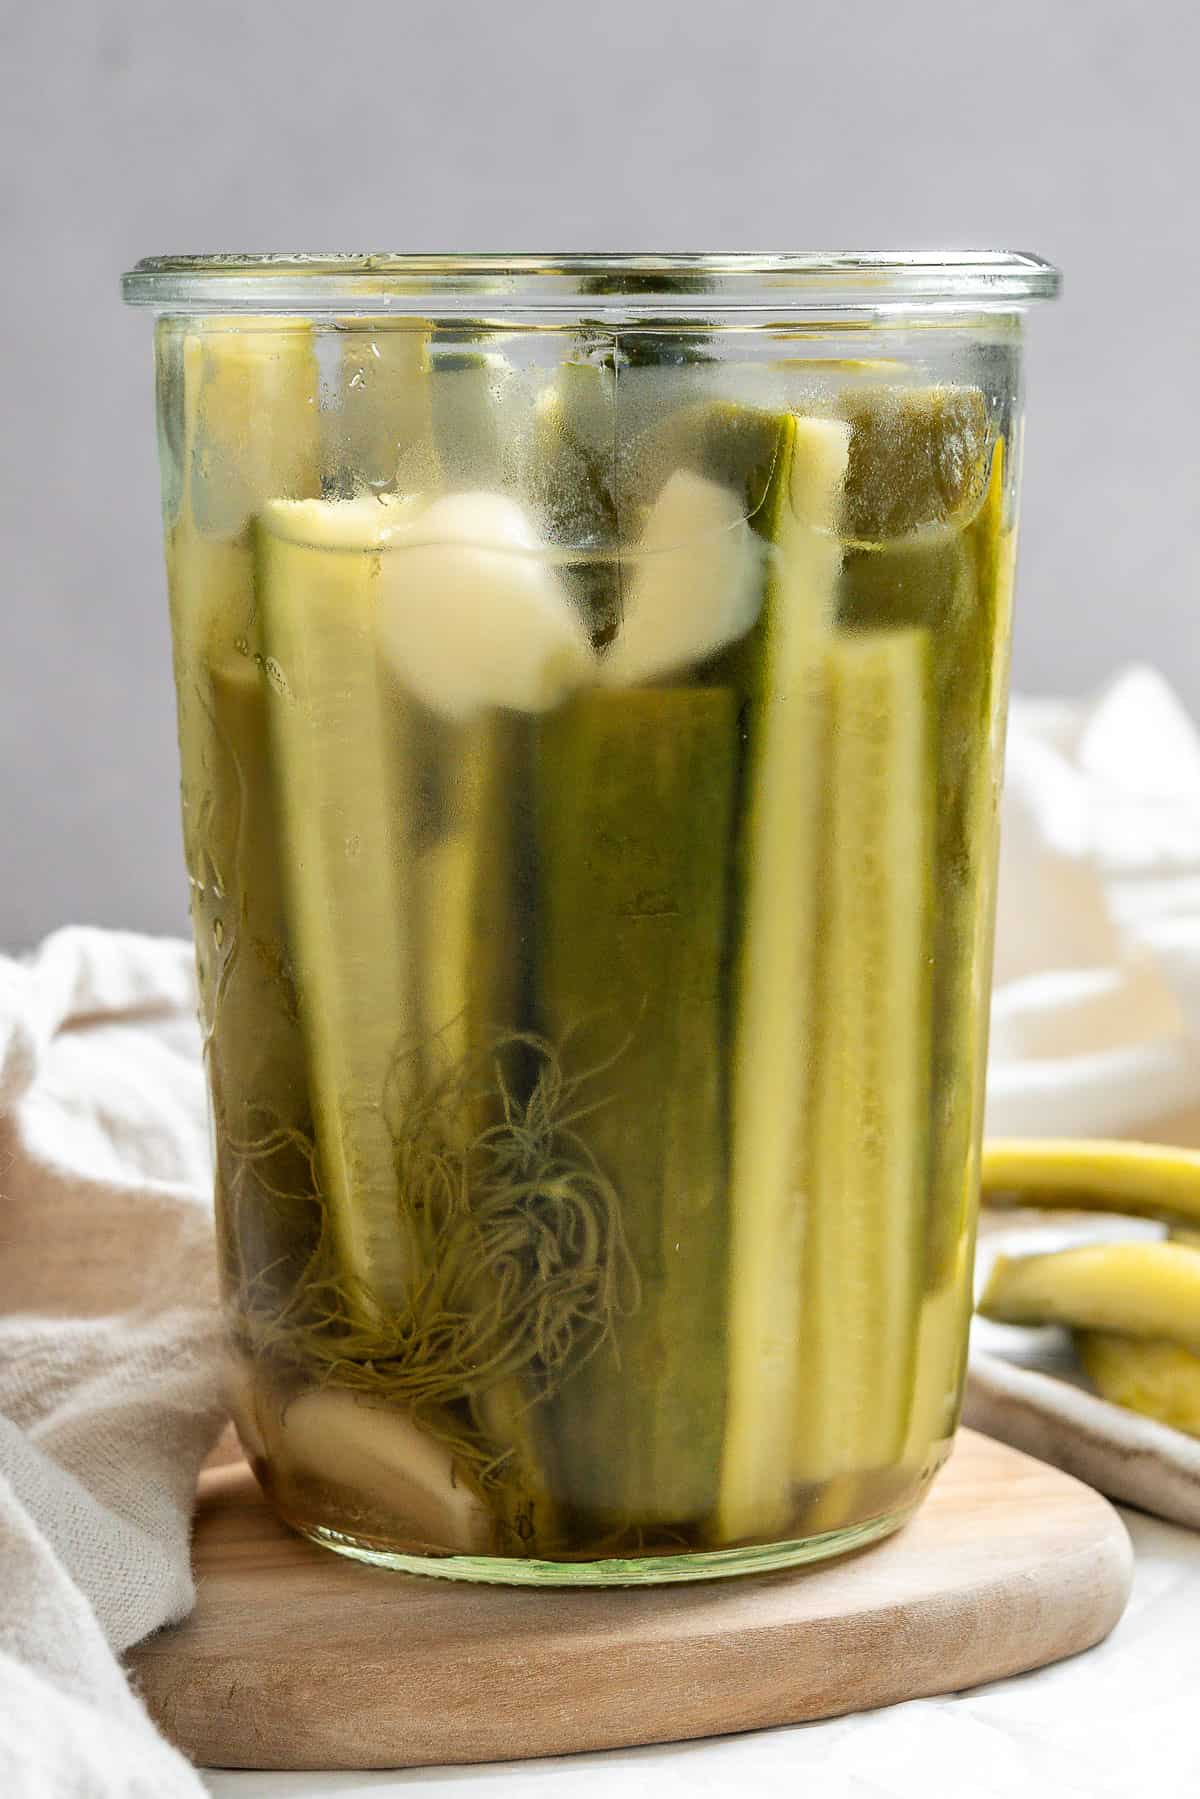 completed Quick Easy Refrigerator Pickles in a jar against a white background